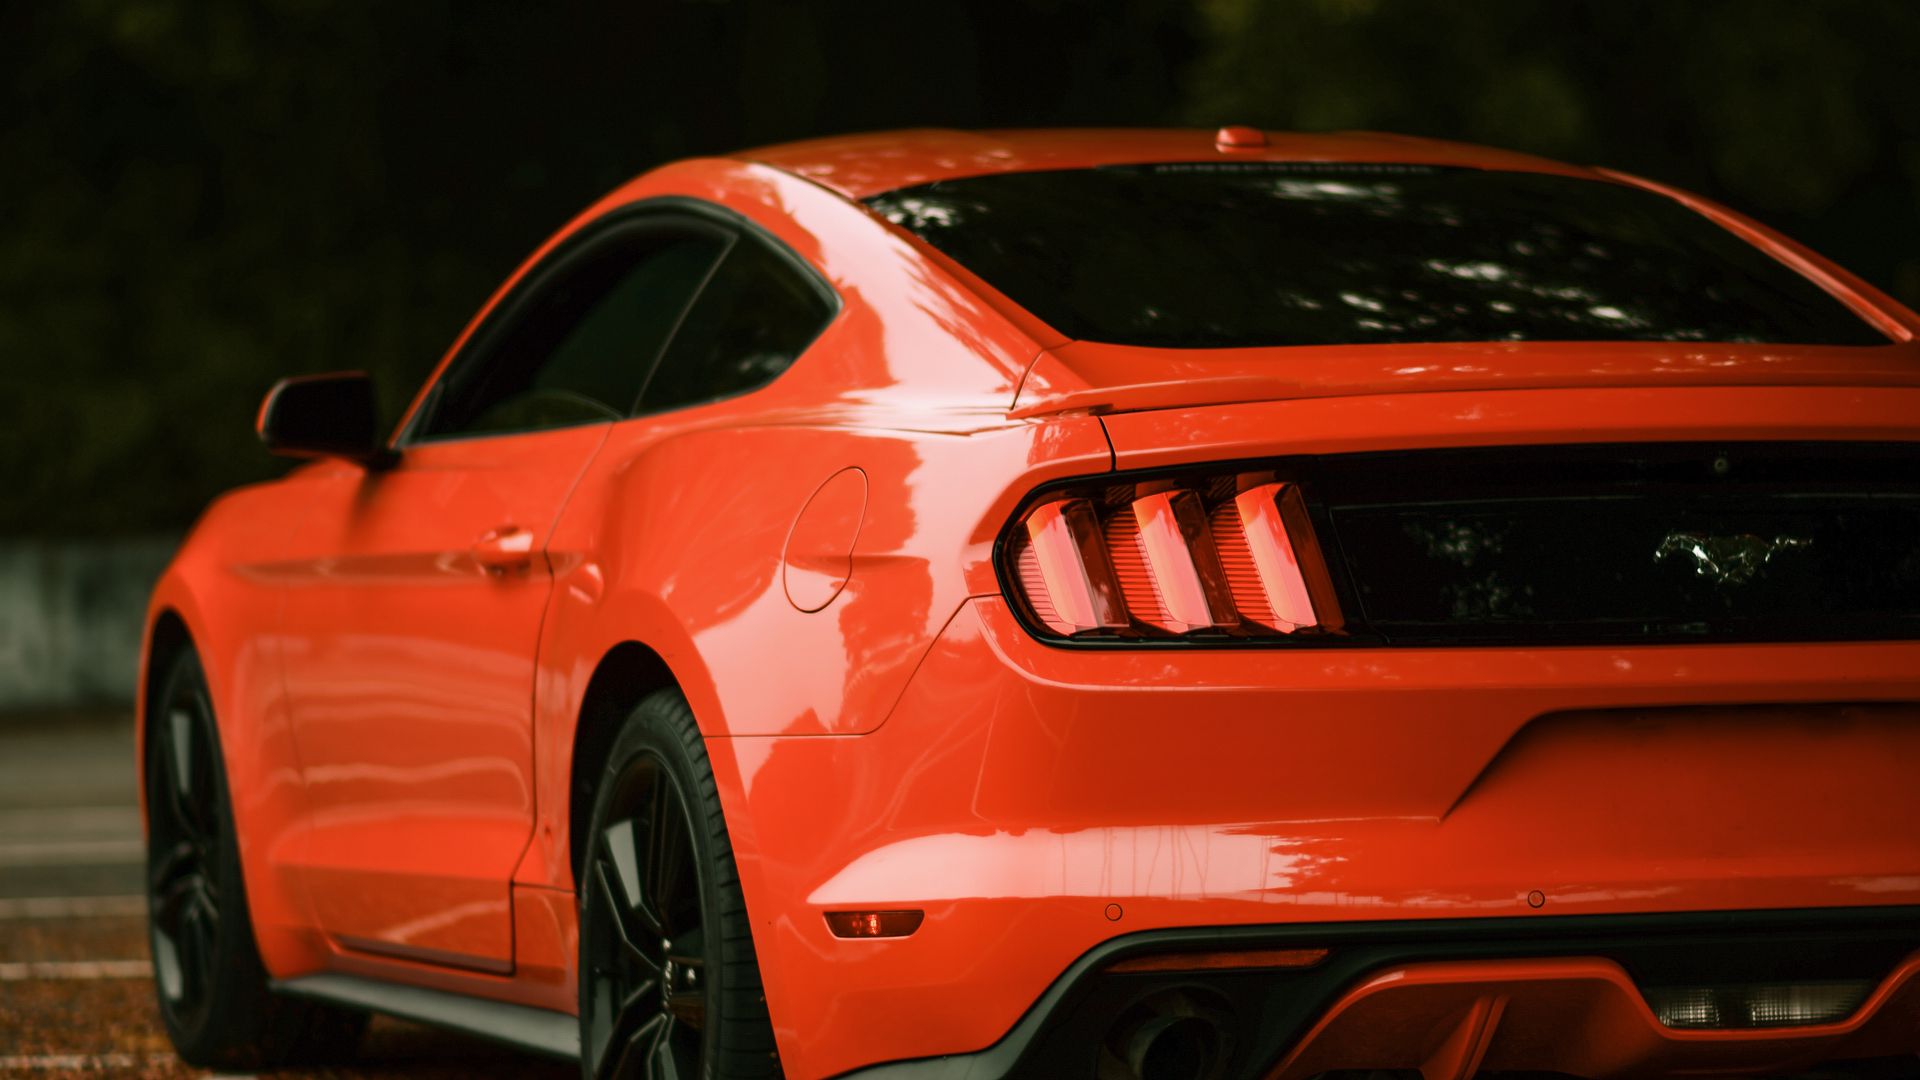 Download wallpaper 1920x1080 ford mustang, ford, car, red, side view